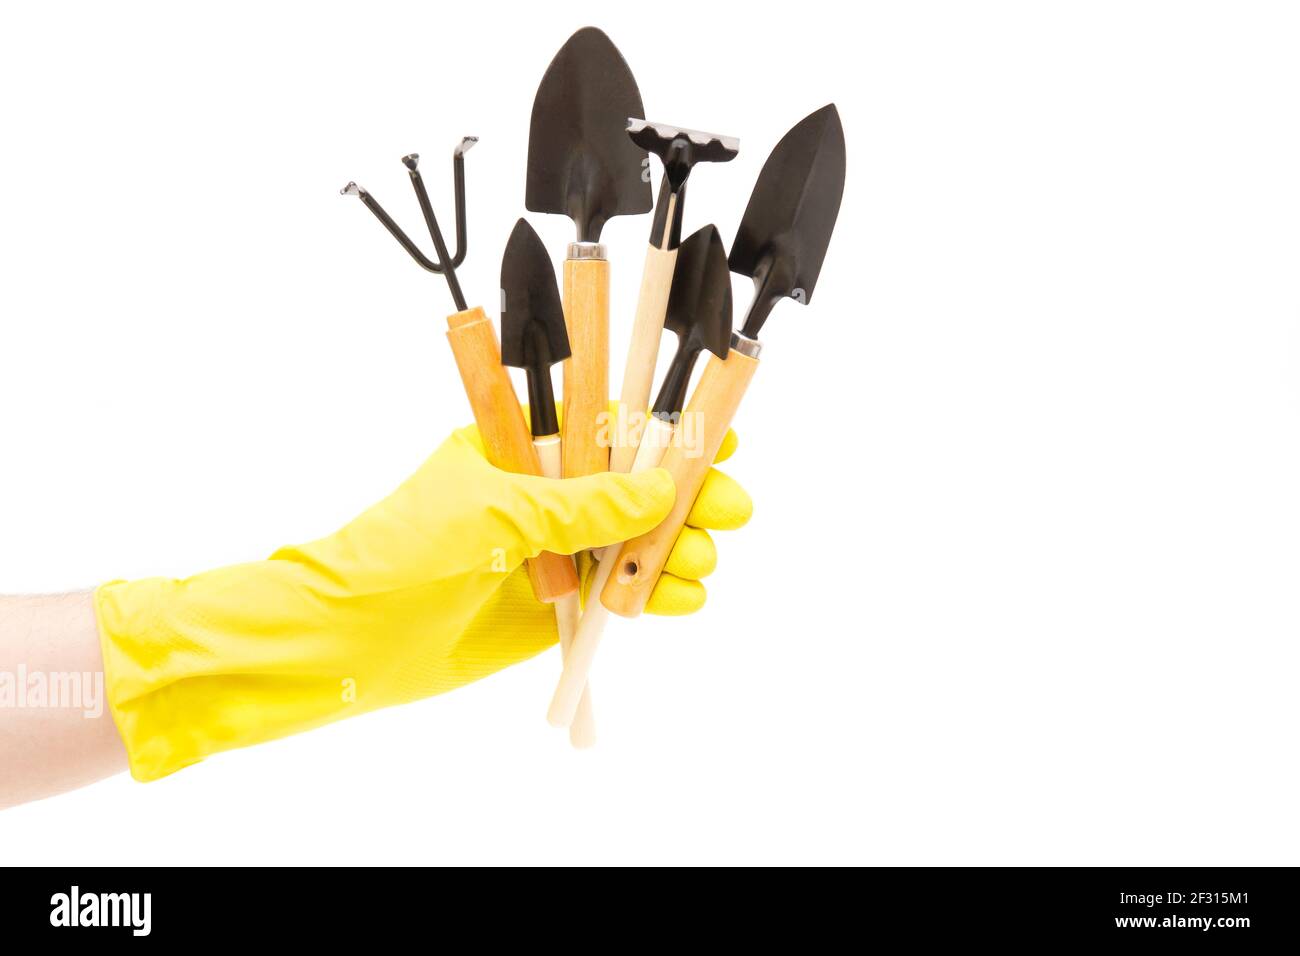 Set of garden hand tools in a male hand wearing a yellow glove isolated on white background. Stock Photo